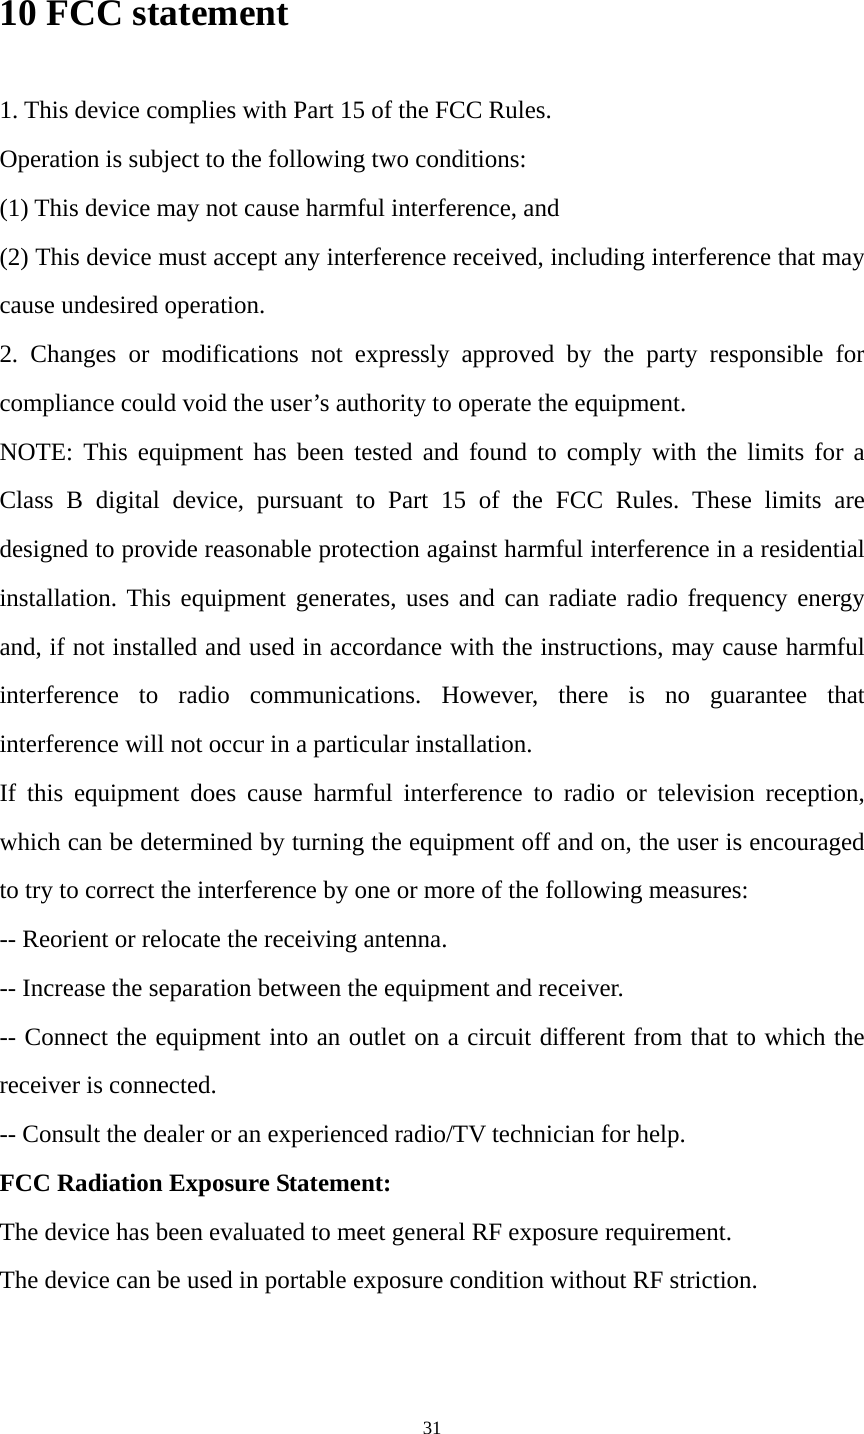 31 10 FCC statement 1. This device complies with Part 15 of the FCC Rules. Operation is subject to the following two conditions: (1) This device may not cause harmful interference, and (2) This device must accept any interference received, including interference that may cause undesired operation. 2. Changes or modifications not expressly approved by the party responsible for compliance could void the user’s authority to operate the equipment. NOTE: This equipment has been tested and found to comply with the limits for a Class B digital device, pursuant to Part 15 of the FCC Rules. These limits are designed to provide reasonable protection against harmful interference in a residential installation. This equipment generates, uses and can radiate radio frequency energy and, if not installed and used in accordance with the instructions, may cause harmful interference to radio communications. However, there is no guarantee that interference will not occur in a particular installation. If this equipment does cause harmful interference to radio or television reception, which can be determined by turning the equipment off and on, the user is encouraged to try to correct the interference by one or more of the following measures: -- Reorient or relocate the receiving antenna. -- Increase the separation between the equipment and receiver. -- Connect the equipment into an outlet on a circuit different from that to which the receiver is connected. -- Consult the dealer or an experienced radio/TV technician for help. FCC Radiation Exposure Statement:   The device has been evaluated to meet general RF exposure requirement.   The device can be used in portable exposure condition without RF striction.   